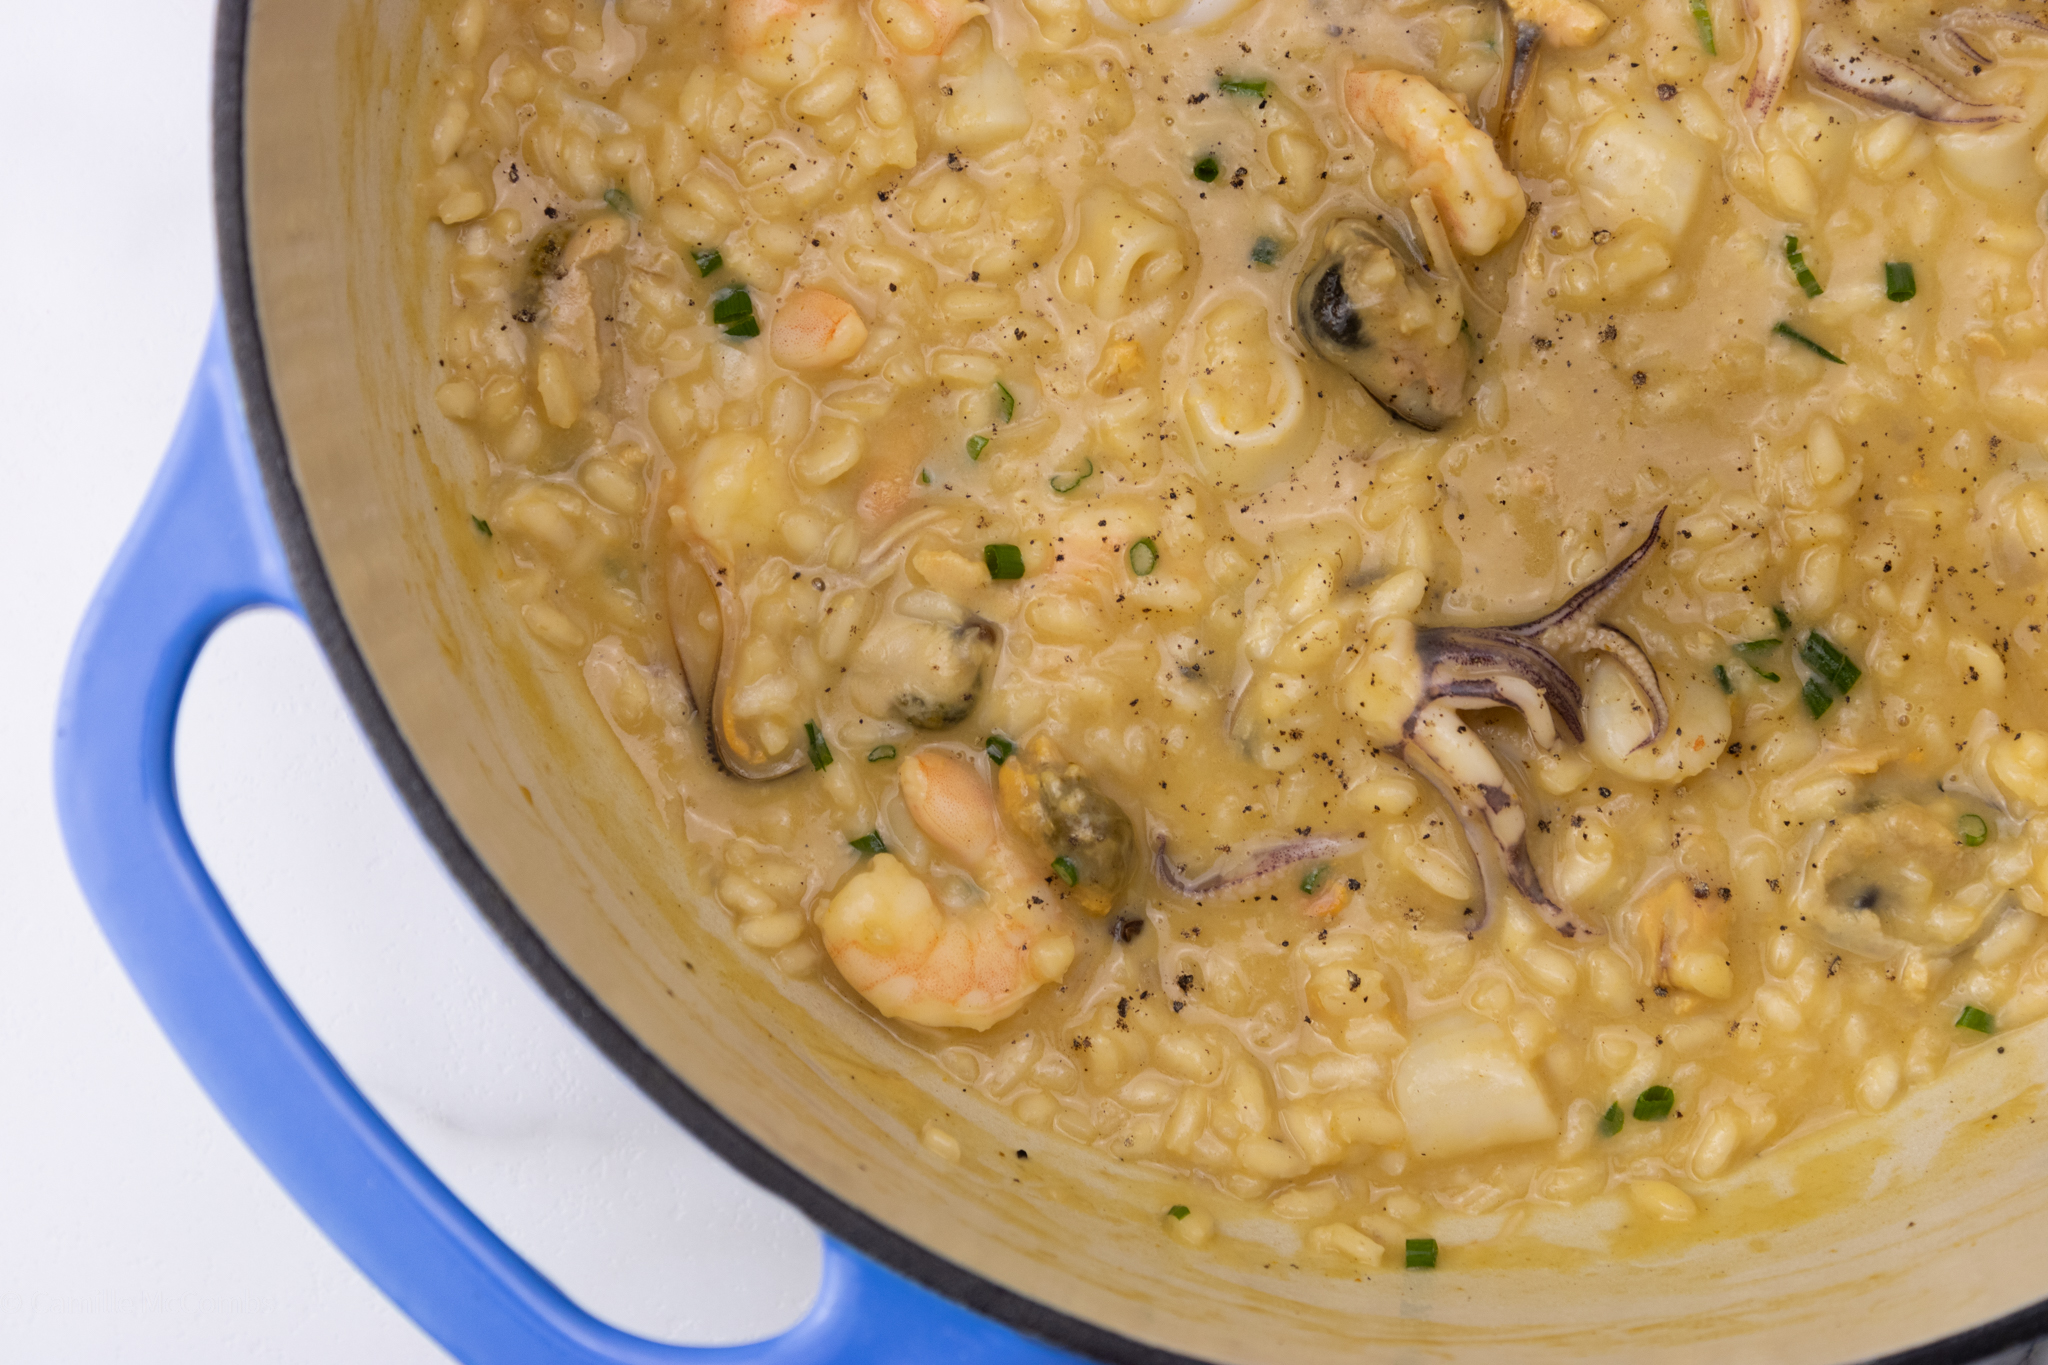 https://mylifeinanaprn.com/wp-content/uploads/2021/02/seafood-risotto-sideview.jpg